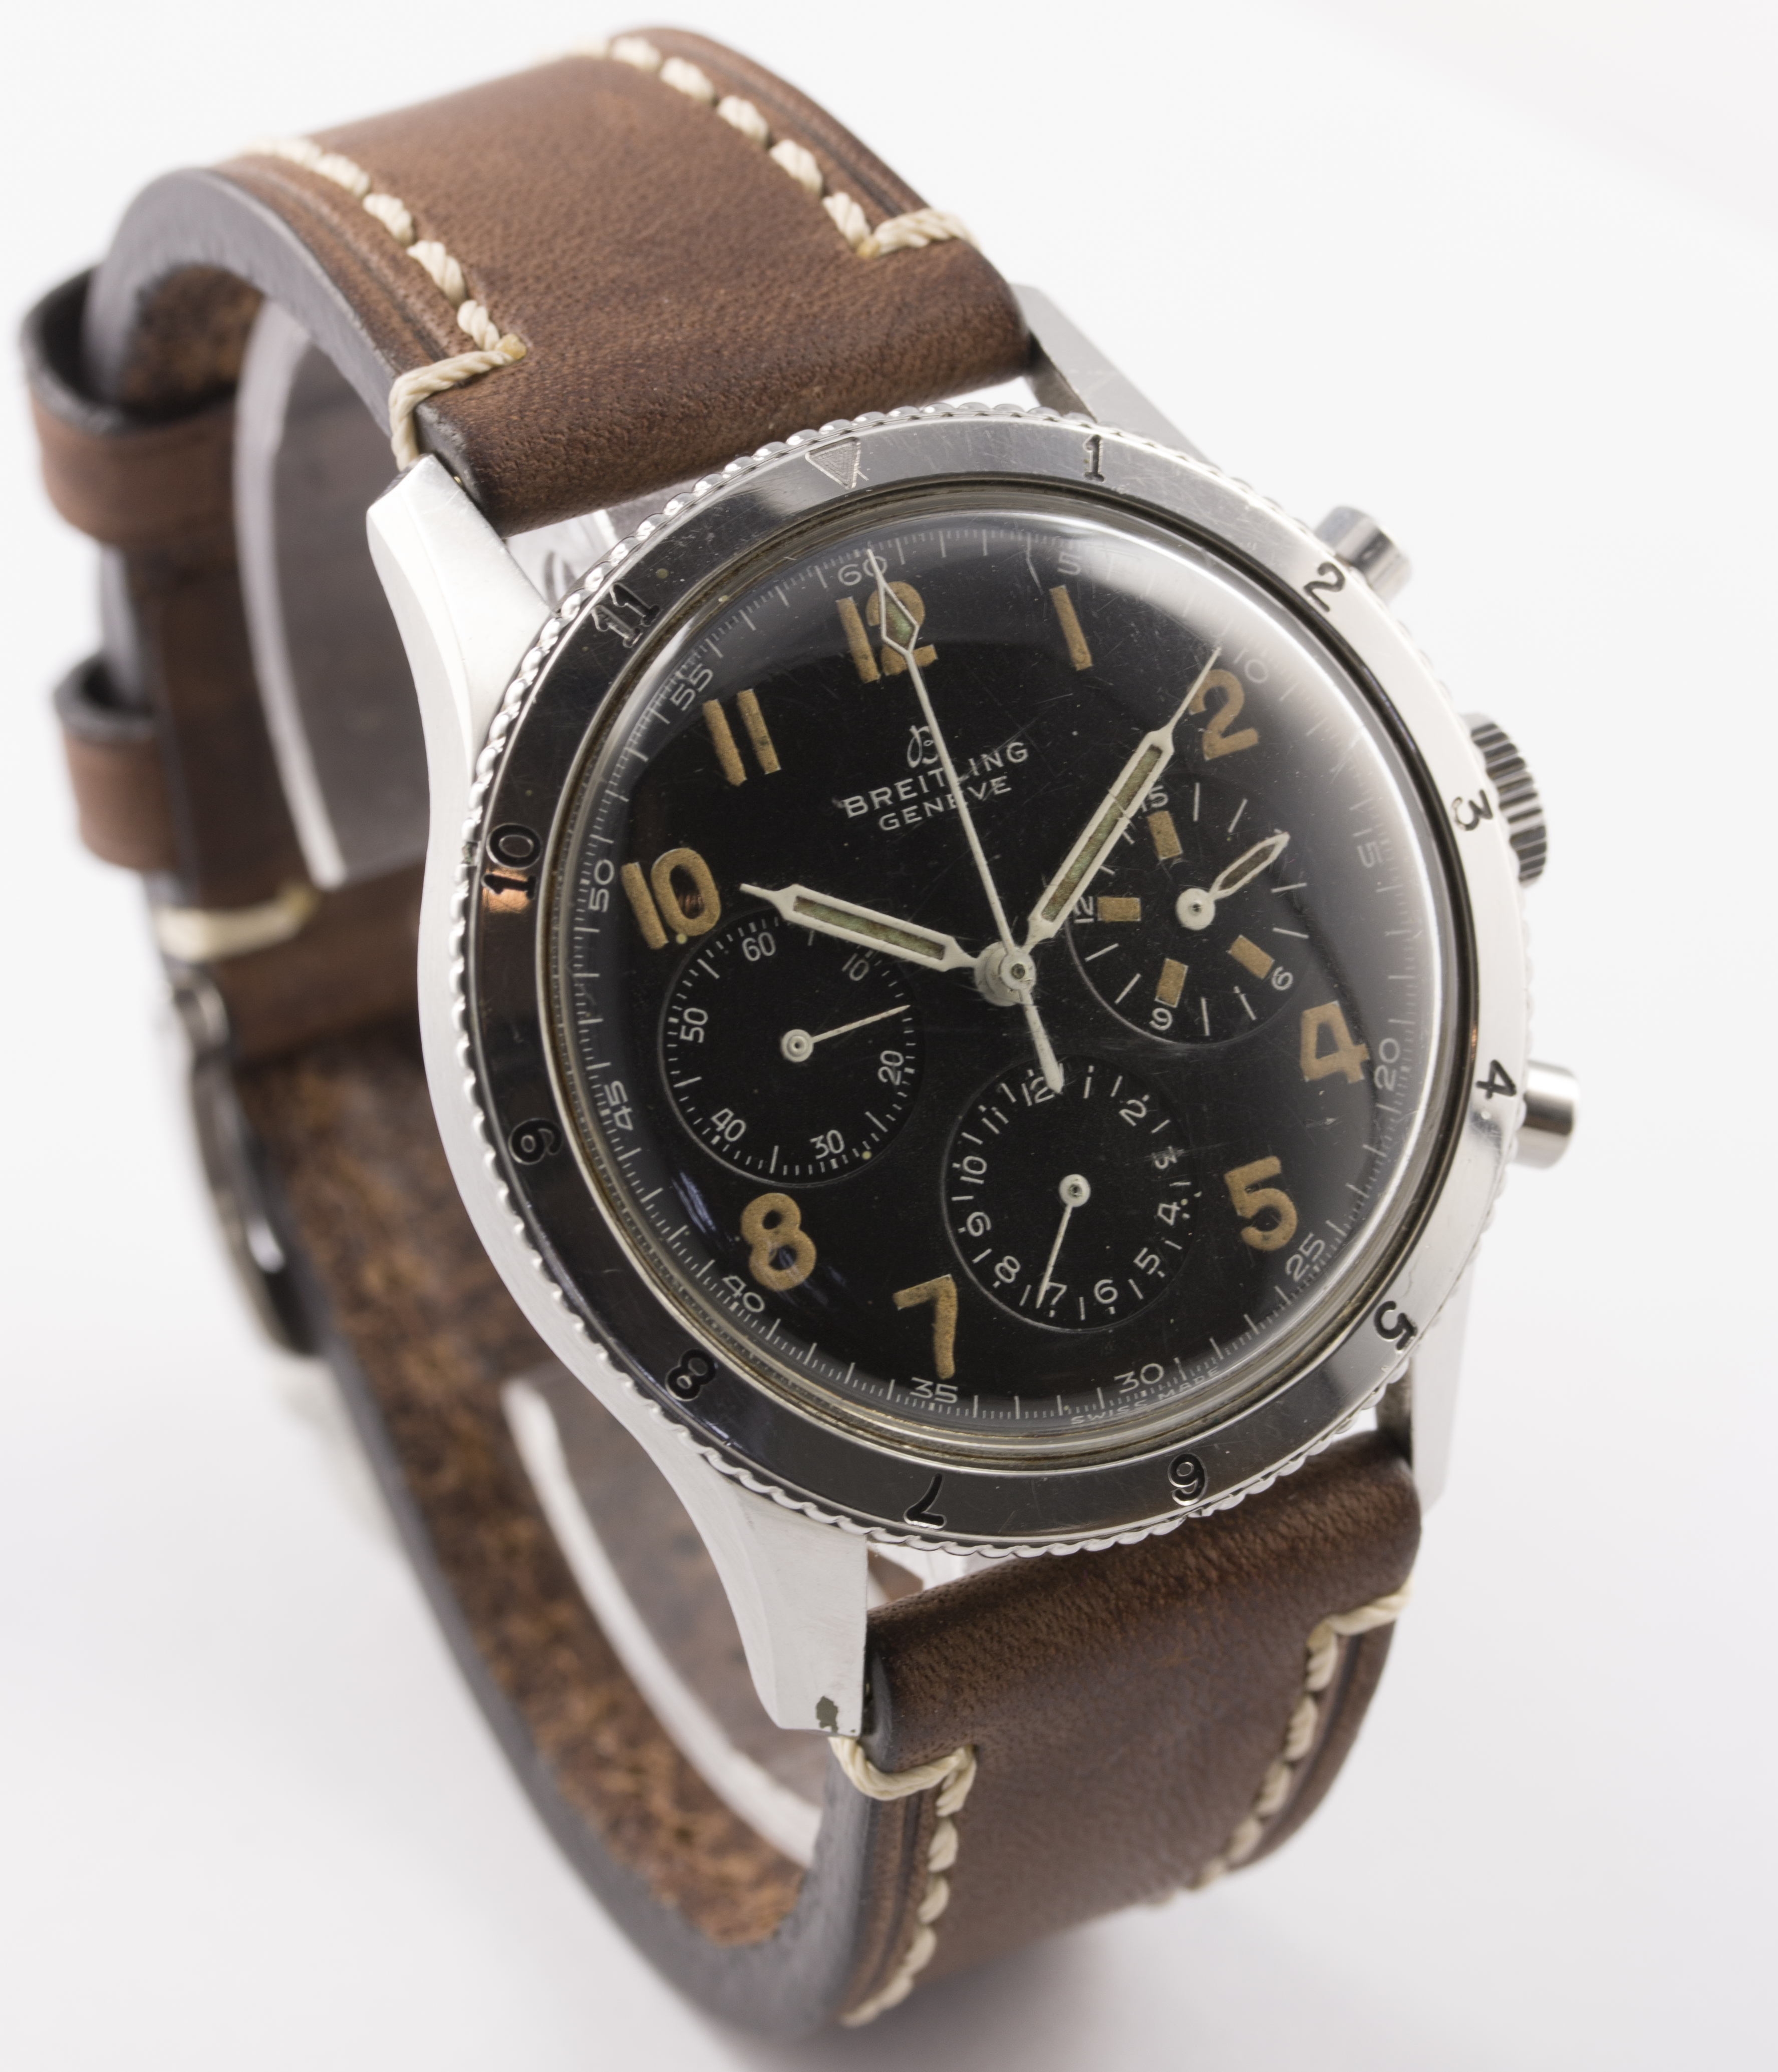 A RARE GENTLEMAN'S STAINLESS STEEL BREITLING AVI CHRONOGRAPH WRIST WATCH CIRCA 1950s, REF. 765 FIRST - Image 6 of 9